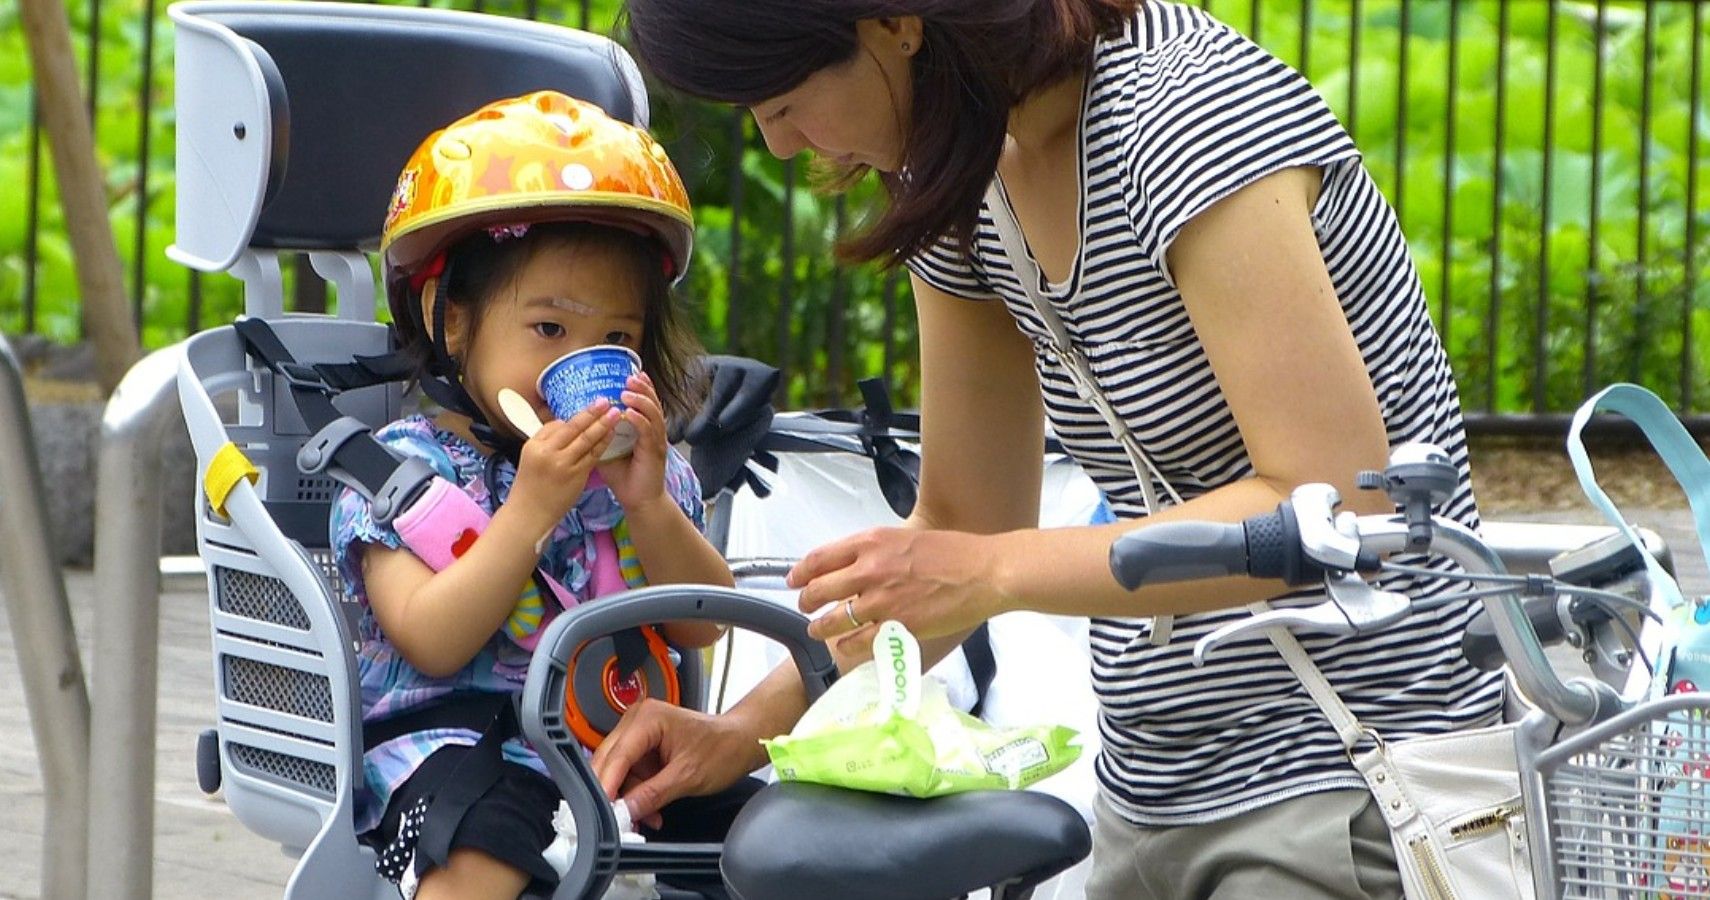 Bike Seats How Safe Are They For Babies and Toddlers